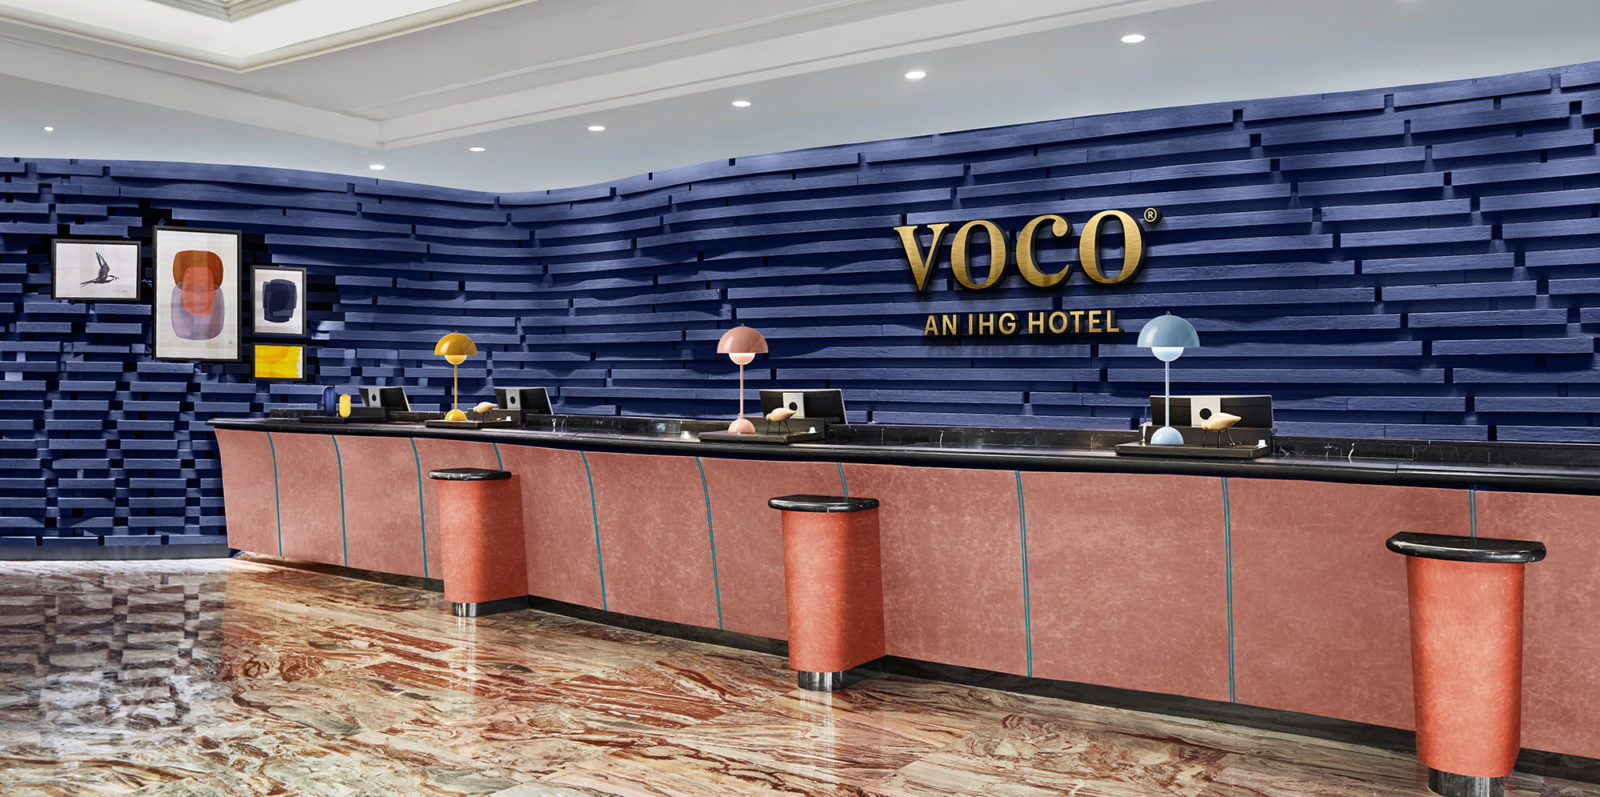 Review: Voco Orchard Singapore promises top-notch hospitality, good food, and a relaxing time